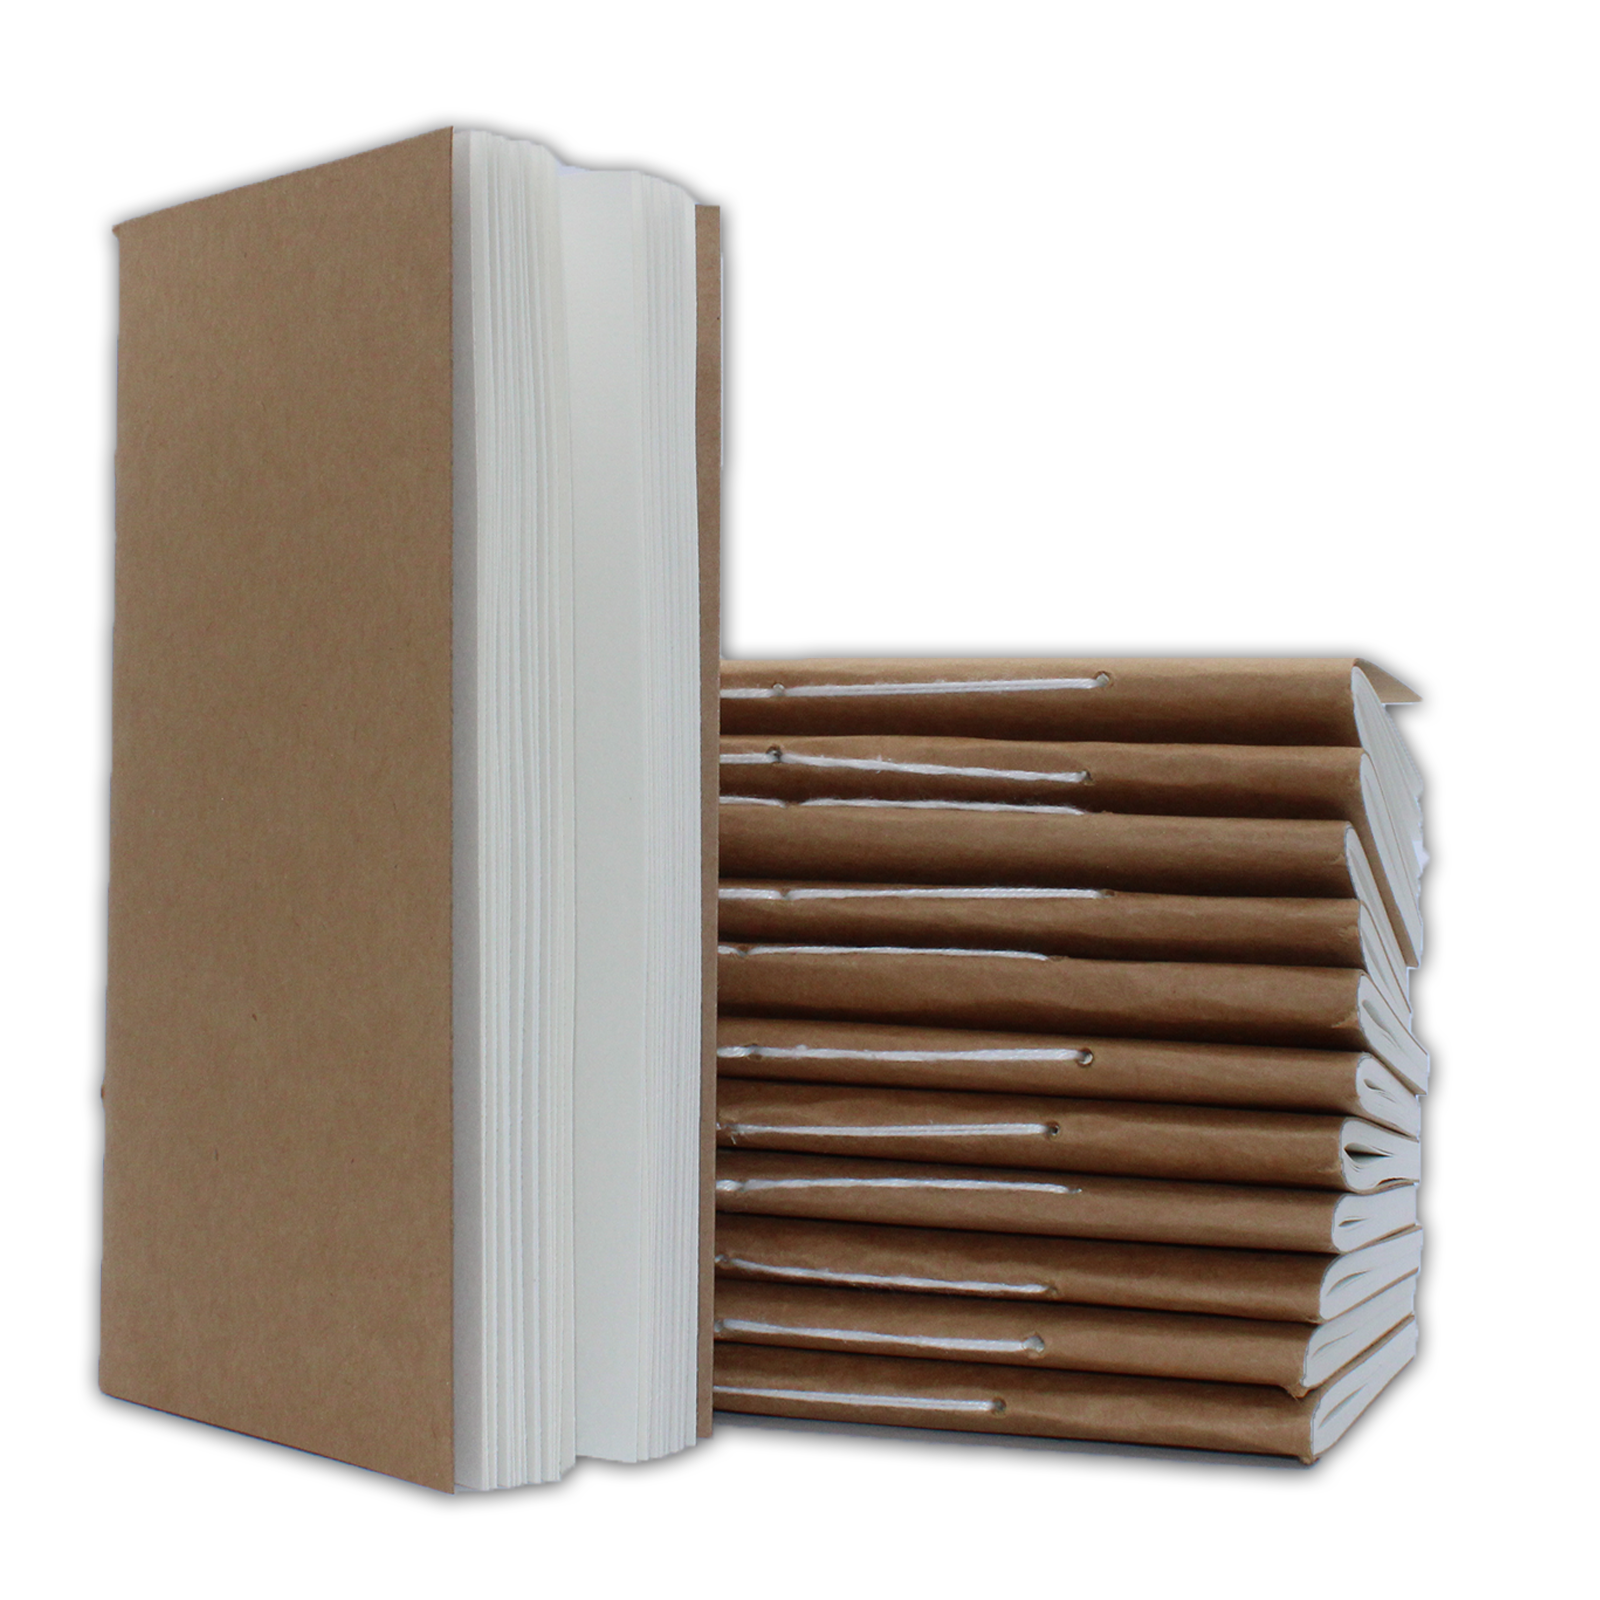 Handmade Leather Journal - Paper Refill - Eco-Friendly (80 pages)